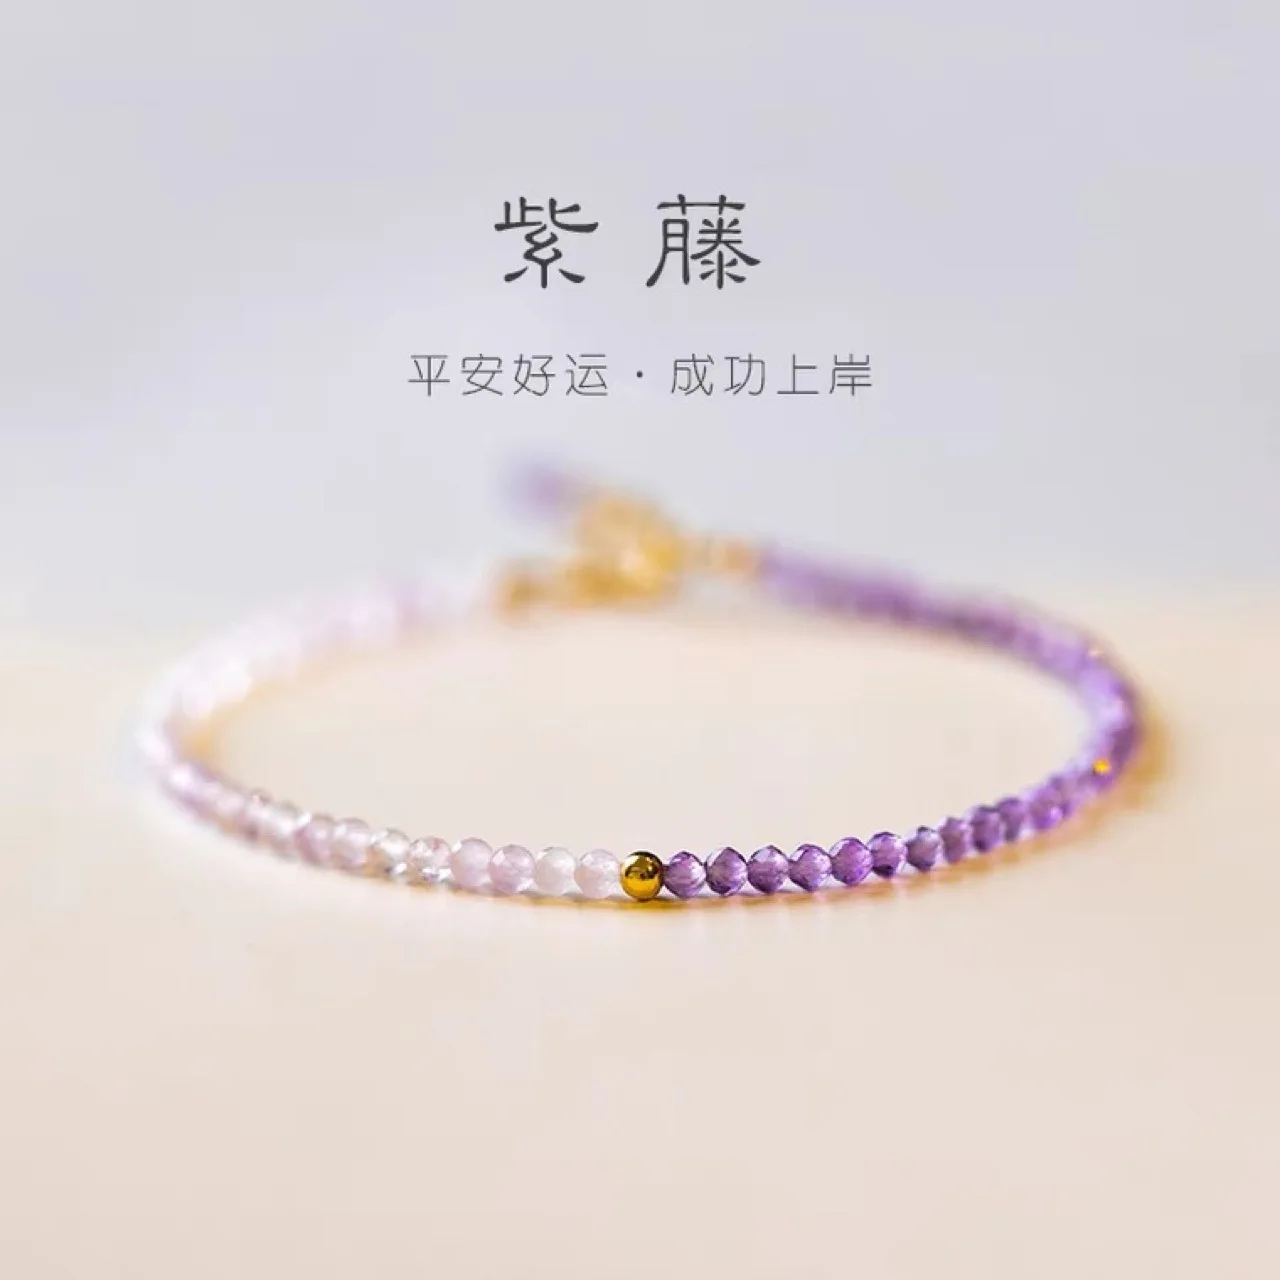 

Successful Postgraduate Entrance Examination Natural Lavender Amethyst Bracelet Very Thin 2mm14k Gold Beads Lucky Female Gift